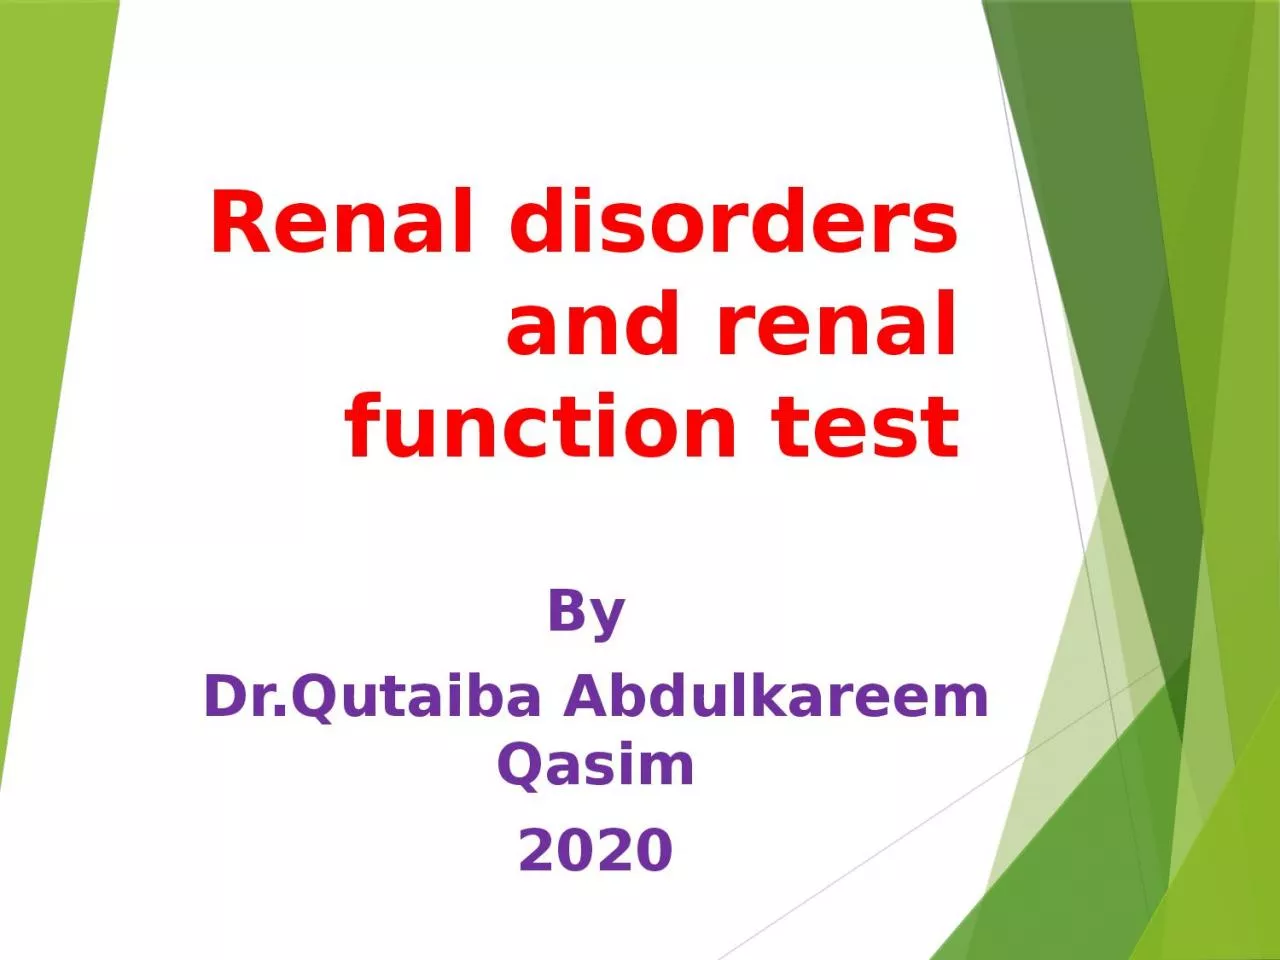 Renal disorders and renal function test